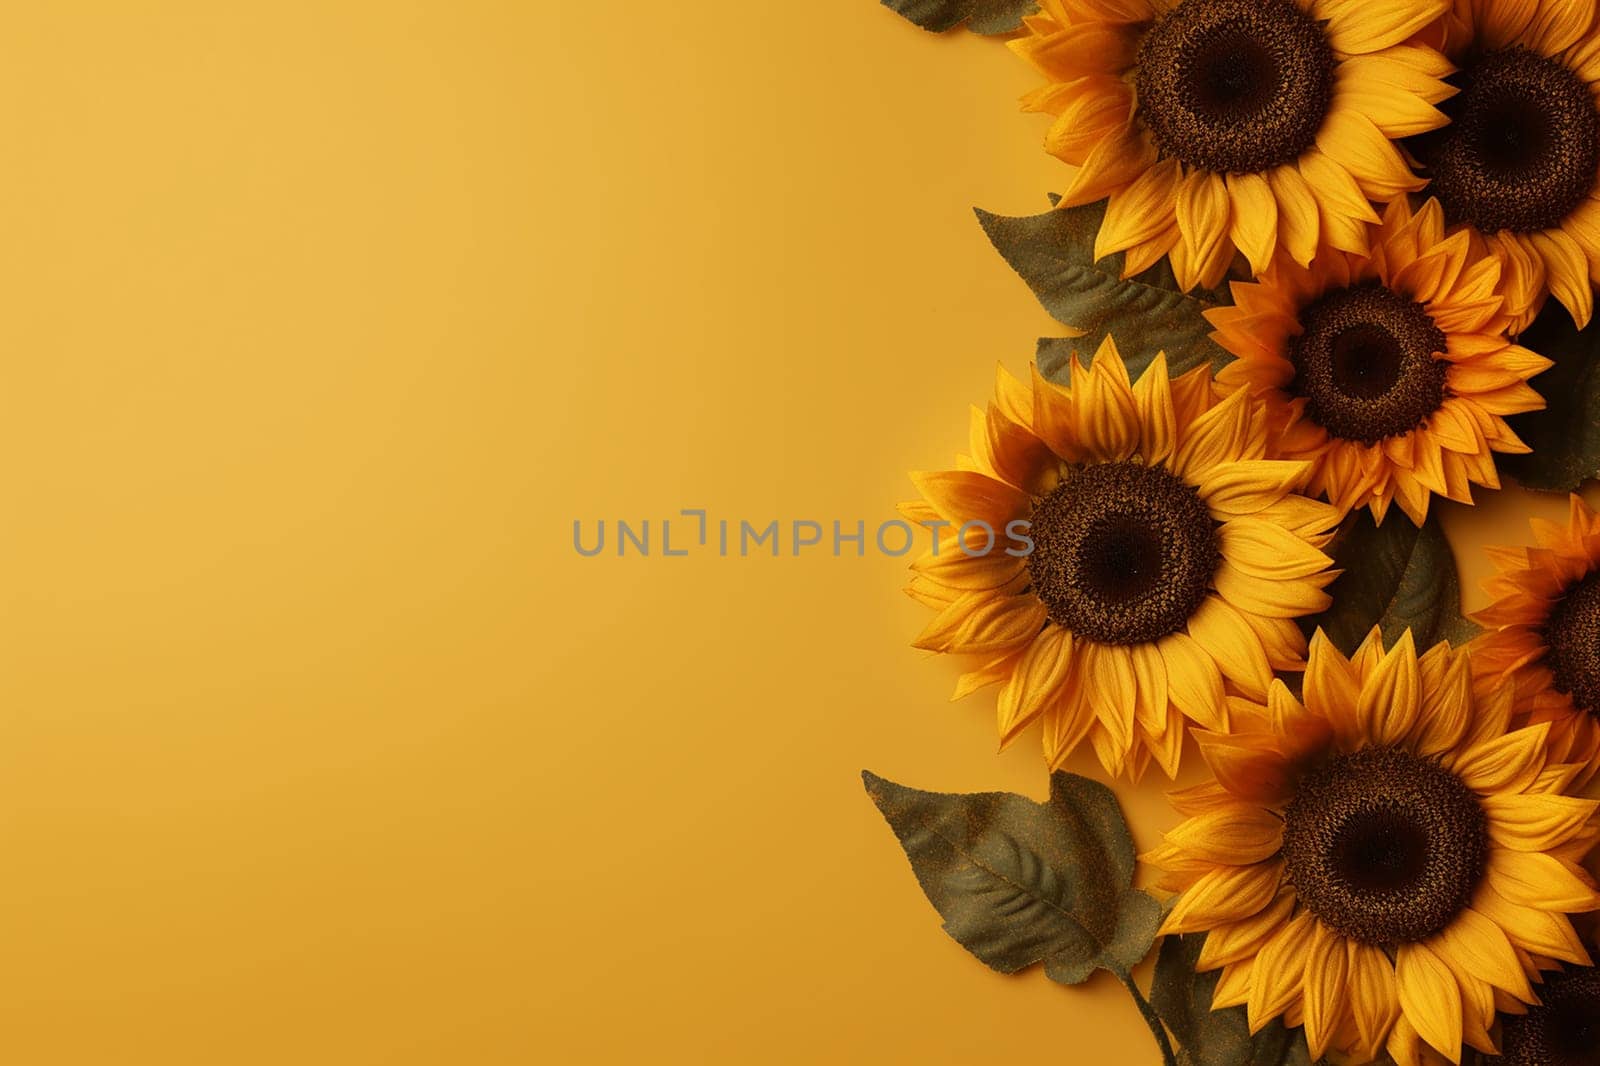 Vibrant sunflowers arranged on a yellow background.